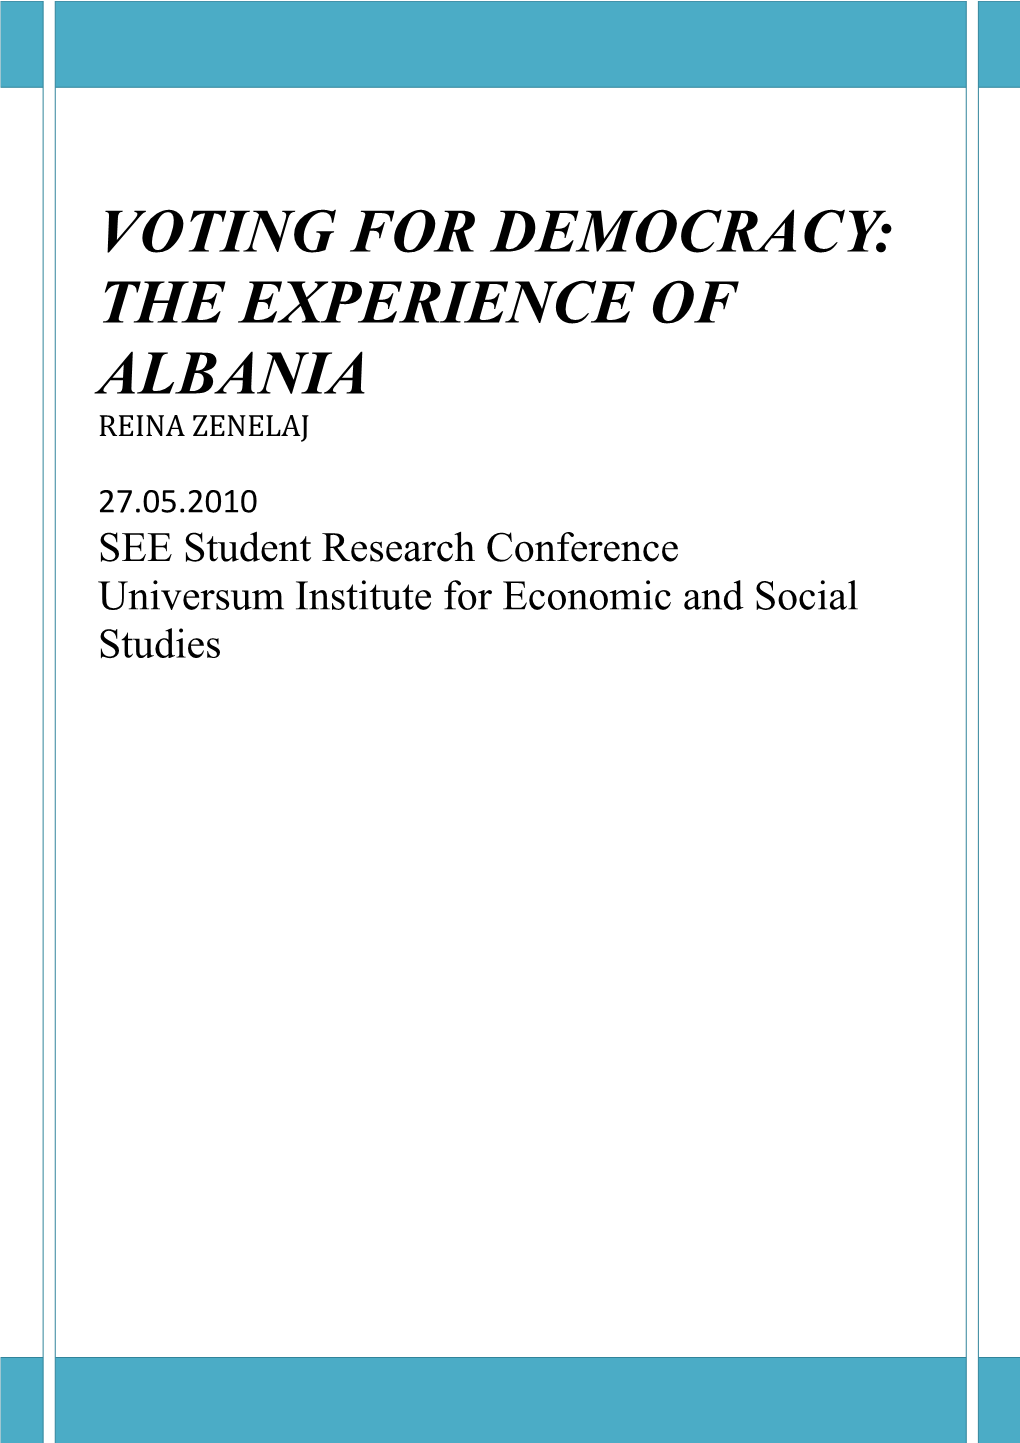 Voting for Democracy: the Experience of Albania